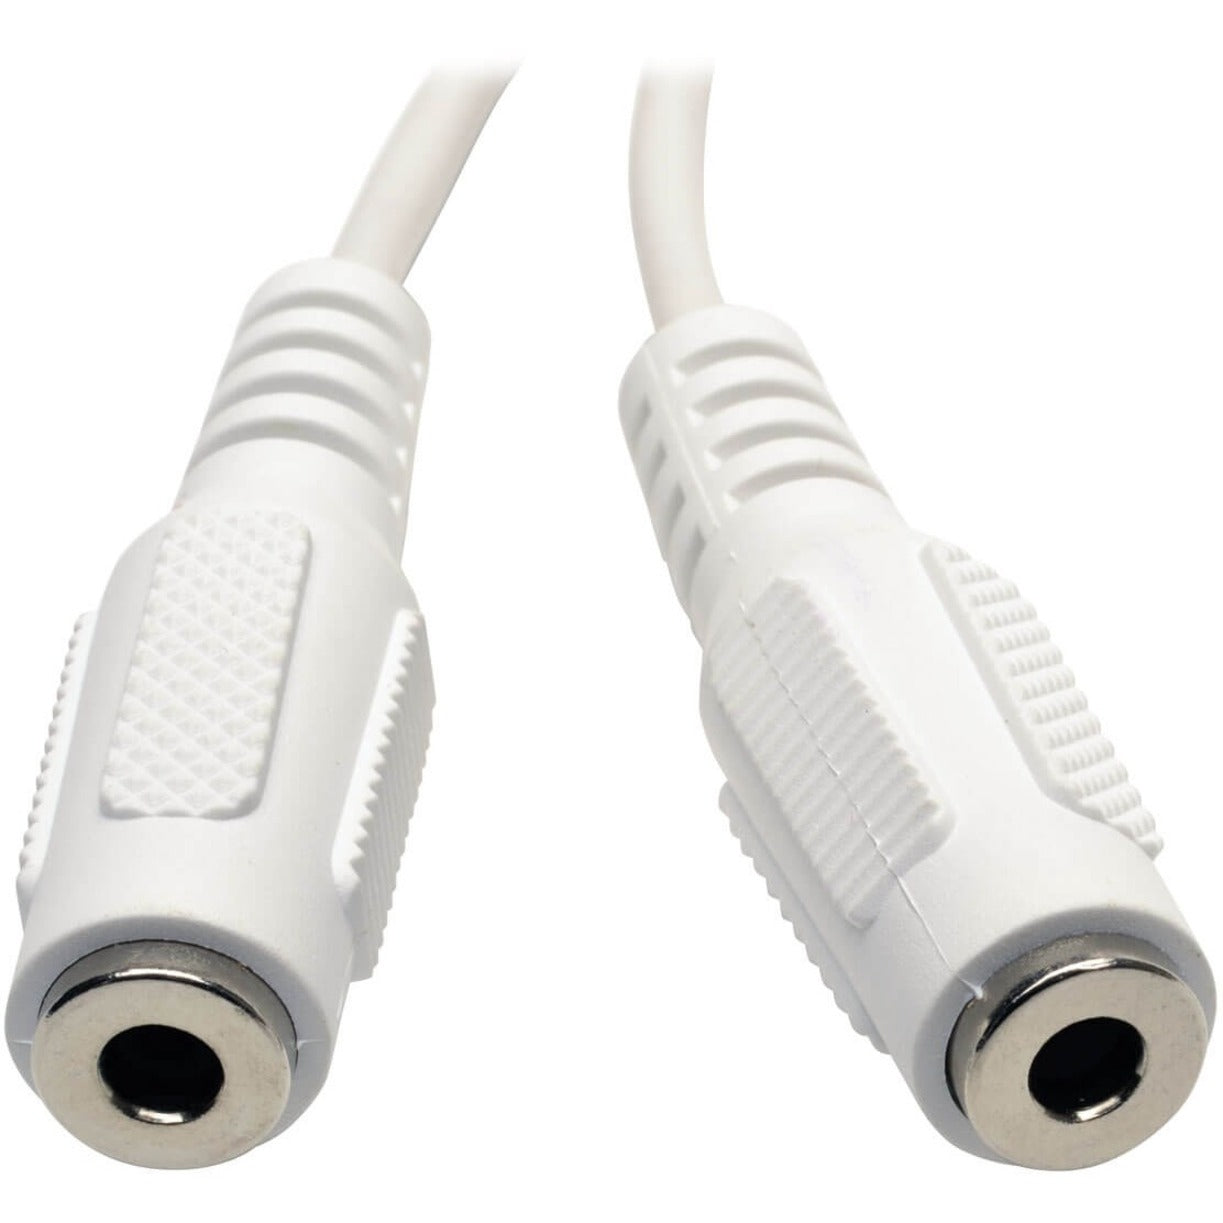 Tripp Lite P313-06N-WH Mini-Phone Audio Cable, 3.5MM Adapter Y Splitter M to 2XF 6-IN., Molded, White